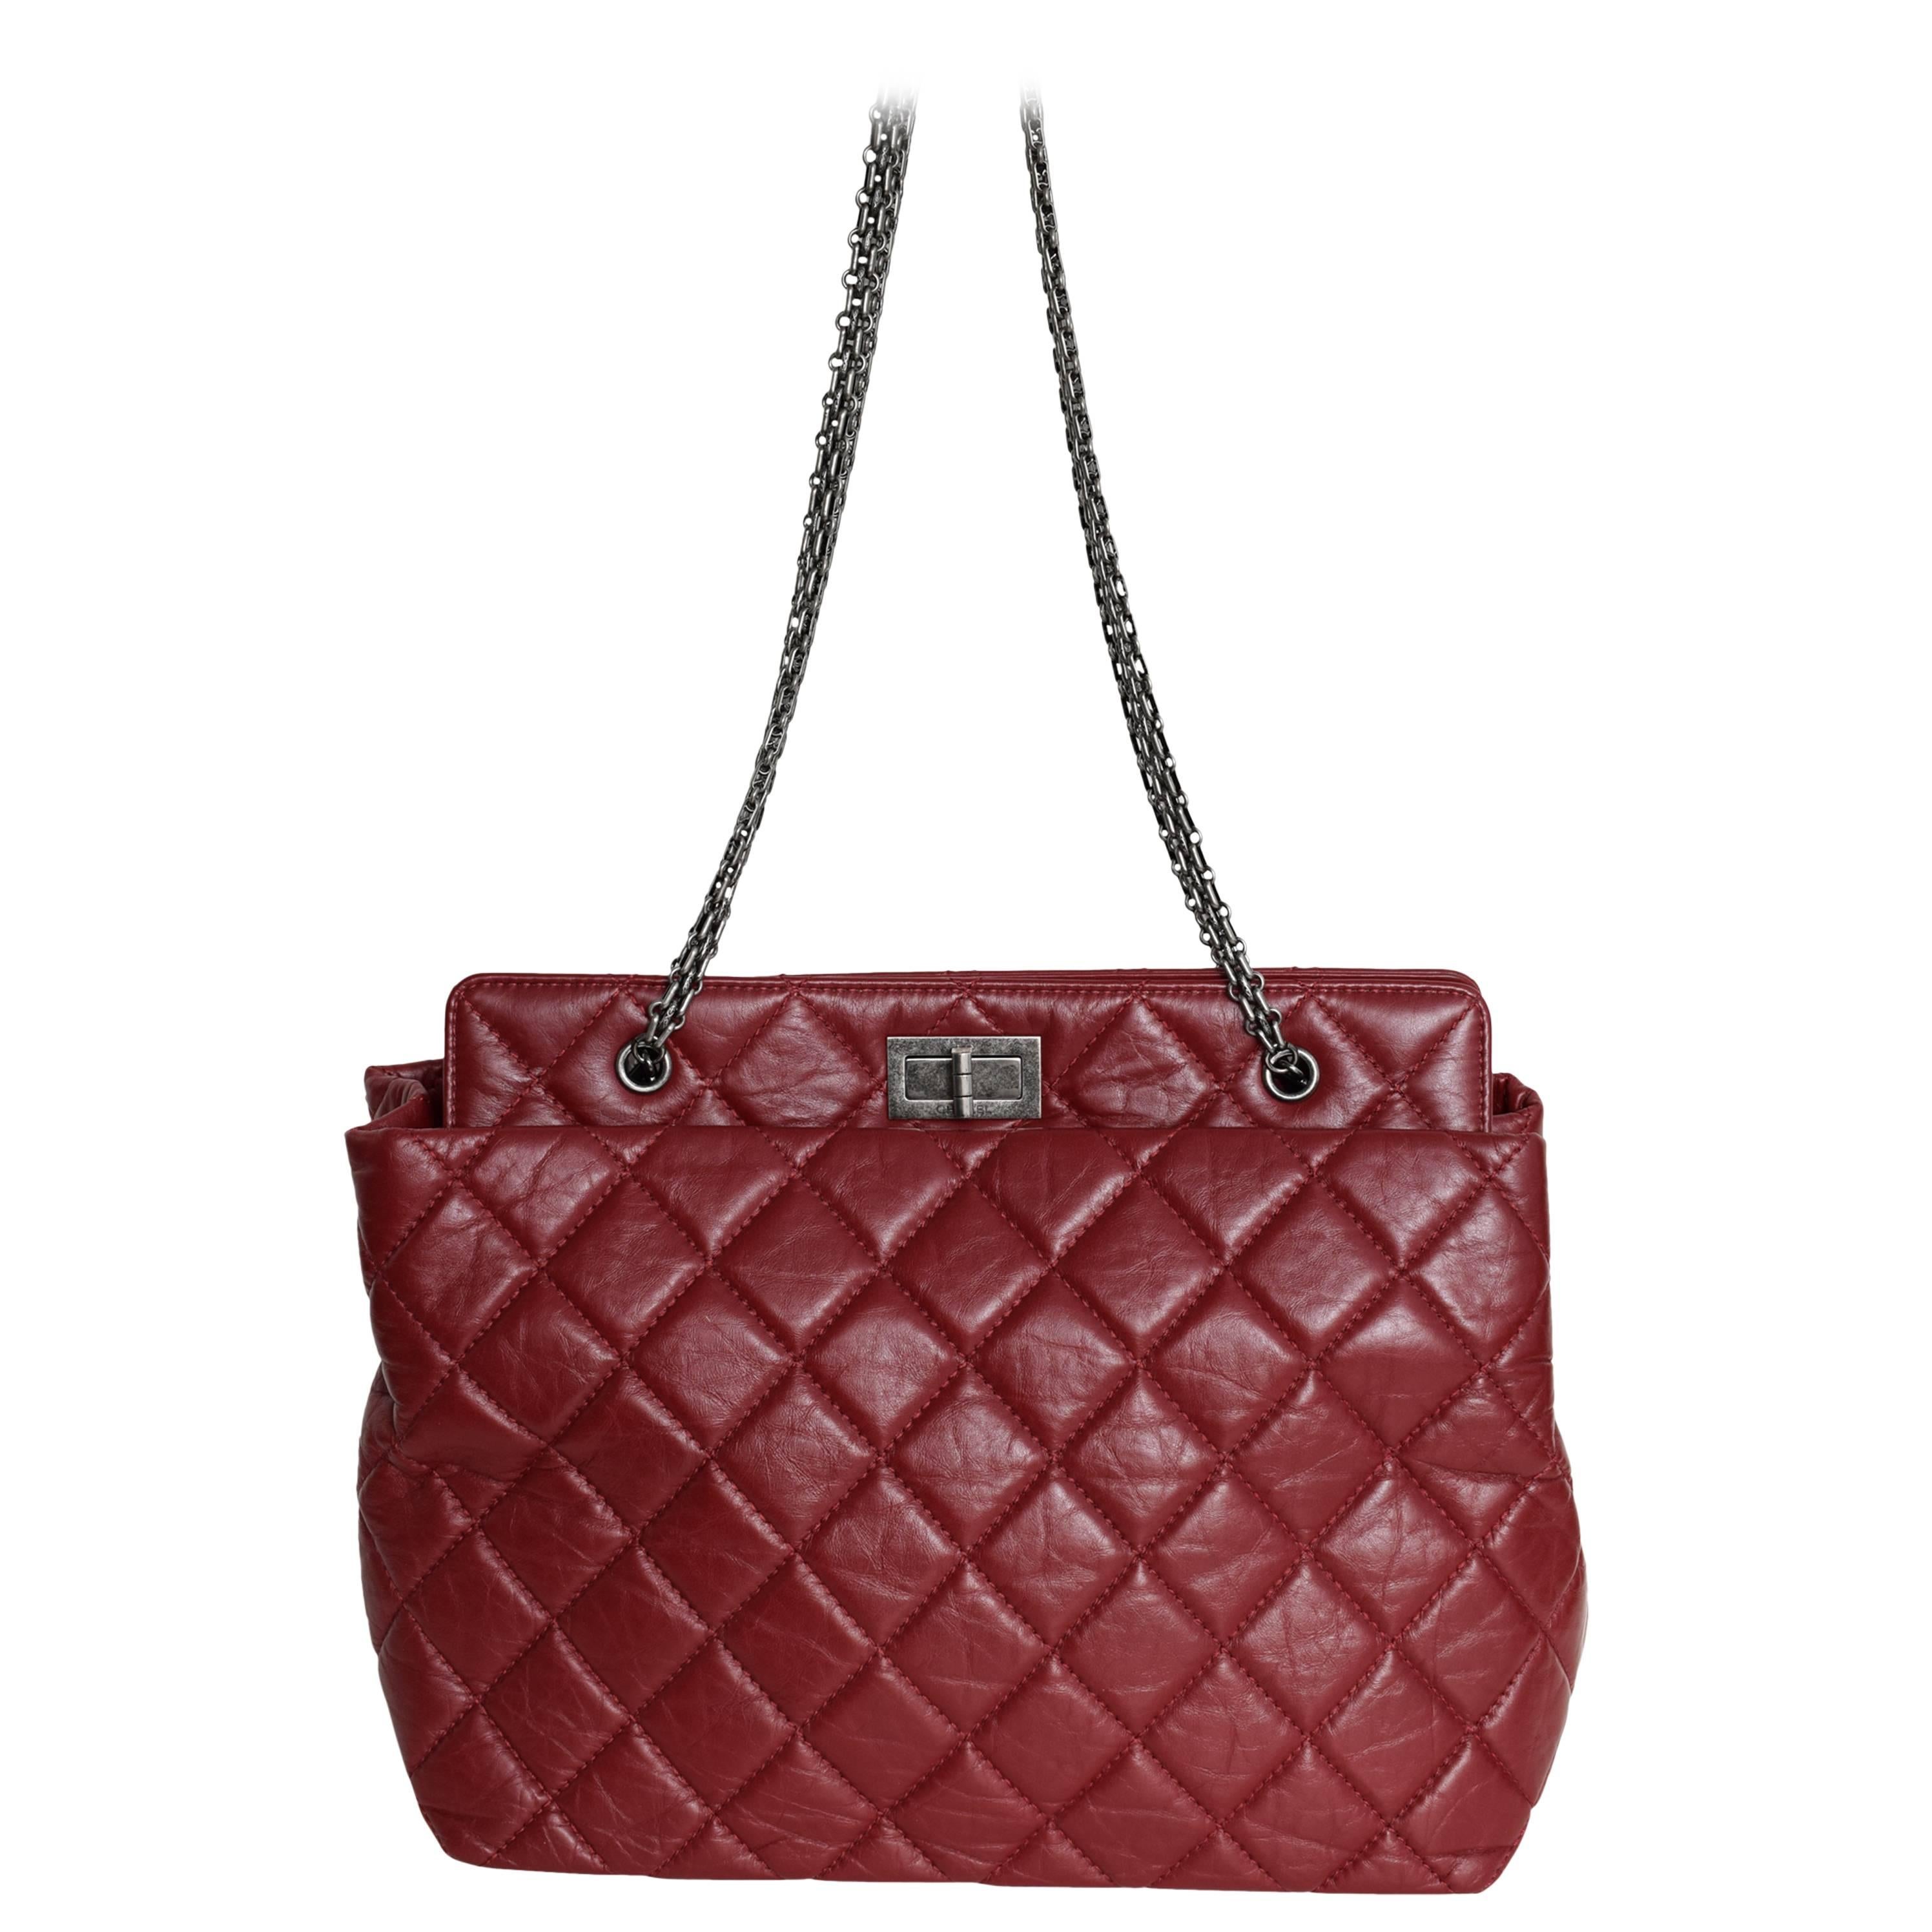 Chanel Grand Shopping Medium Tote Red w/ aged Leather bag.